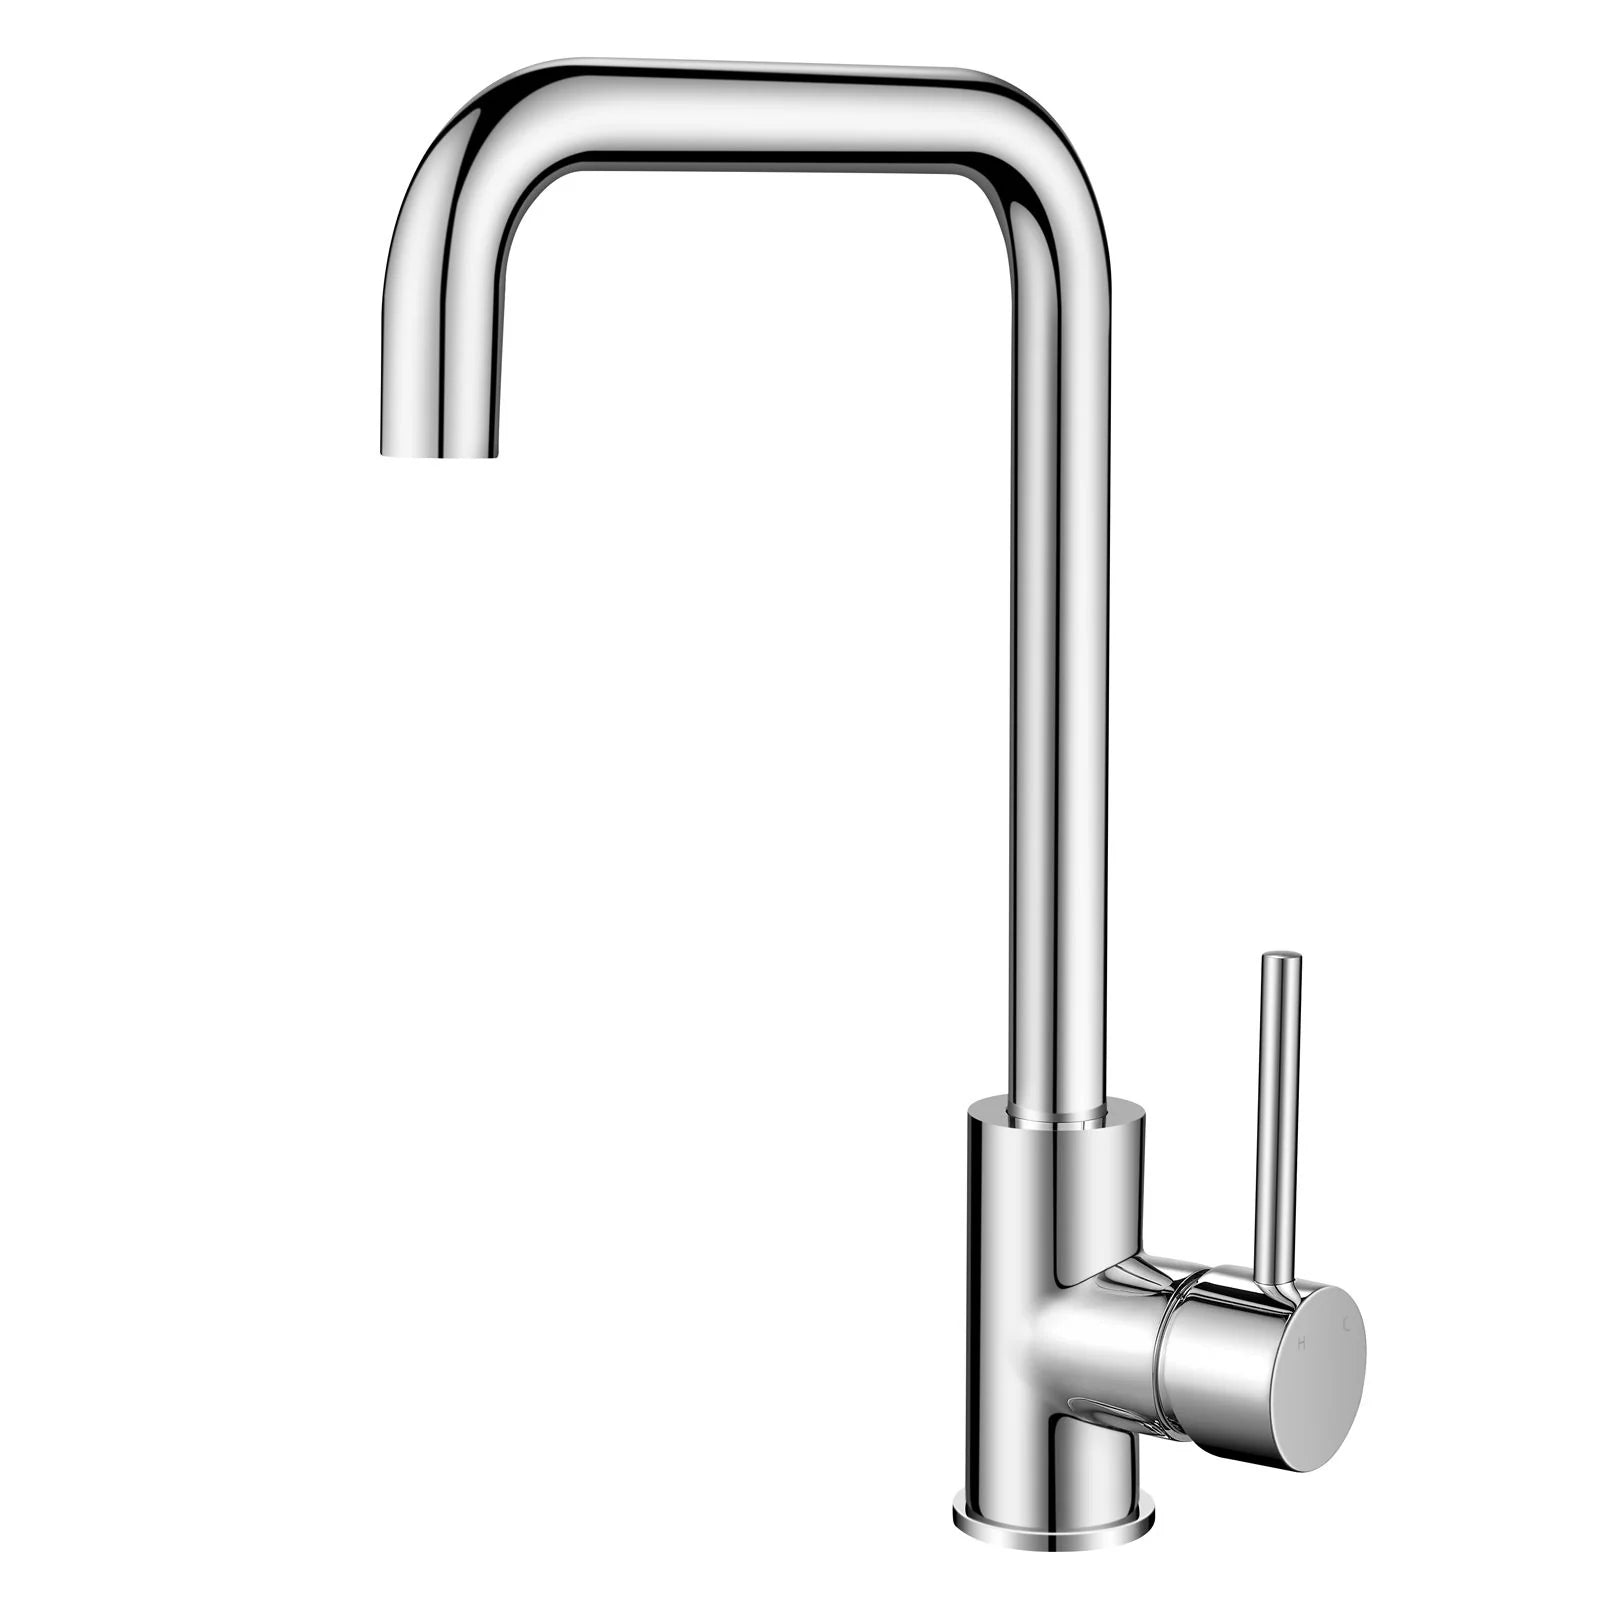 Electroplated Brass Swivel Spout Kitchen Mixer Tap: Stylish and versatile addition to your kitchen-CH1027.KM